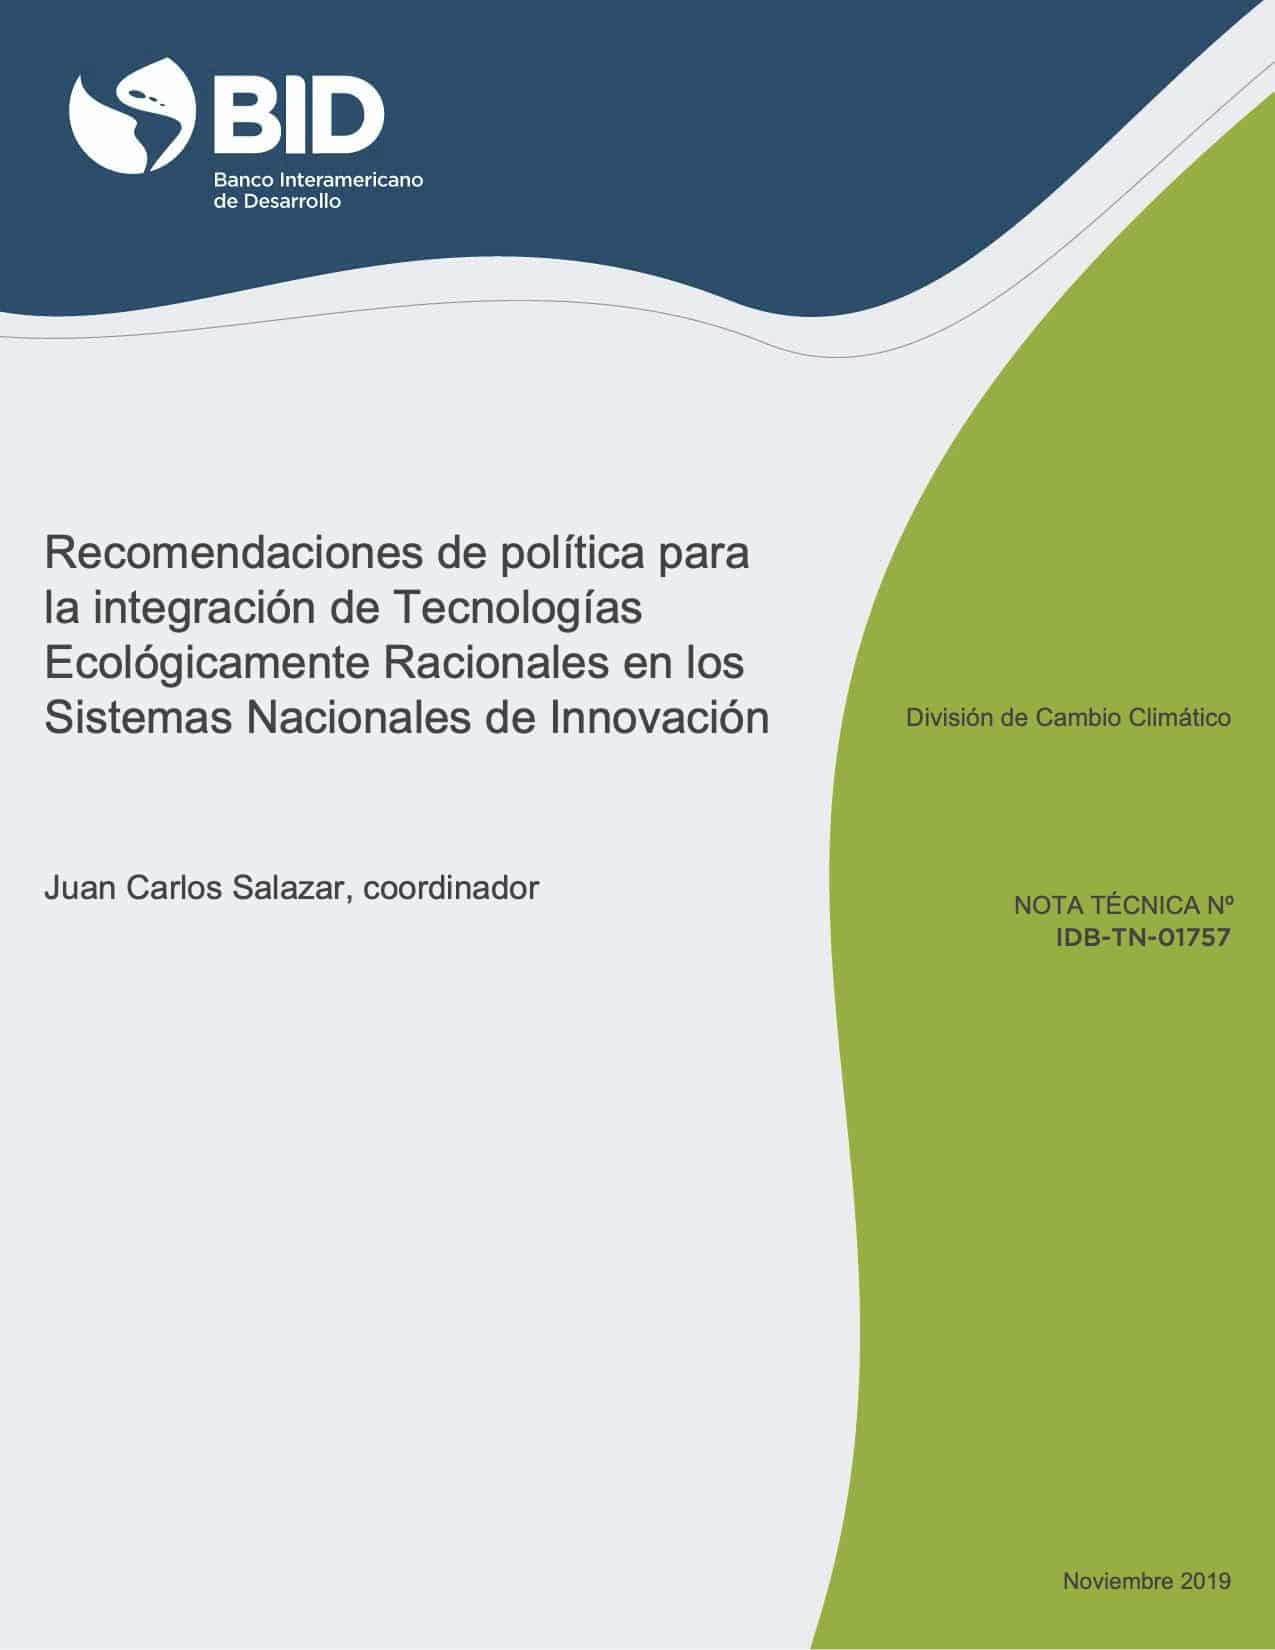 Policy recommendations to integrate Environmentally Sound Technologies (ESTs) into National Innovation Systems (NIS) in Latin America and the Caribbean